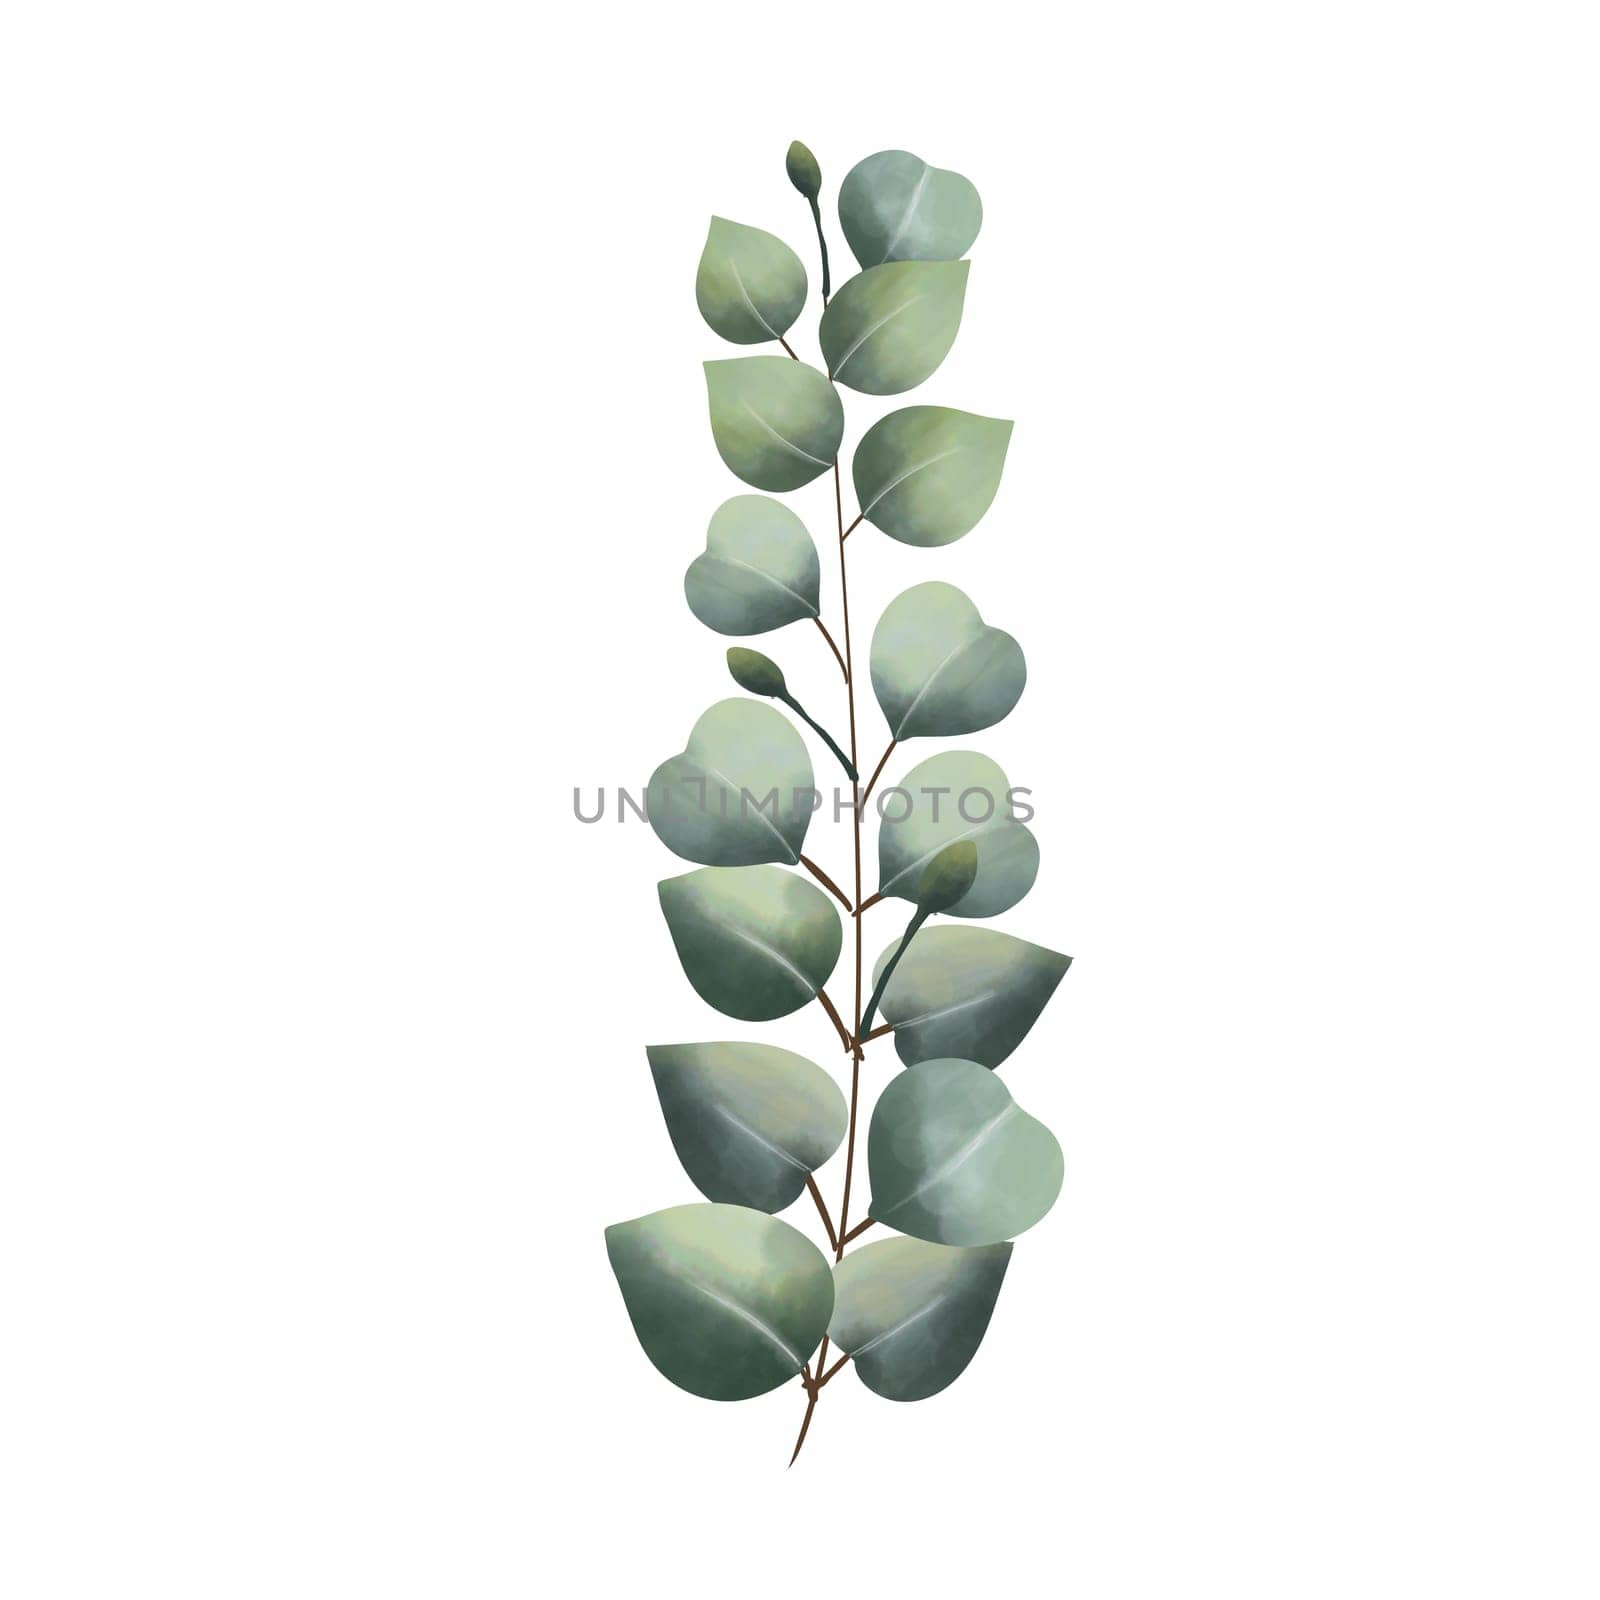 watercolor eucalyptus vines on a white background
Isolated by sarayut_thaneerat